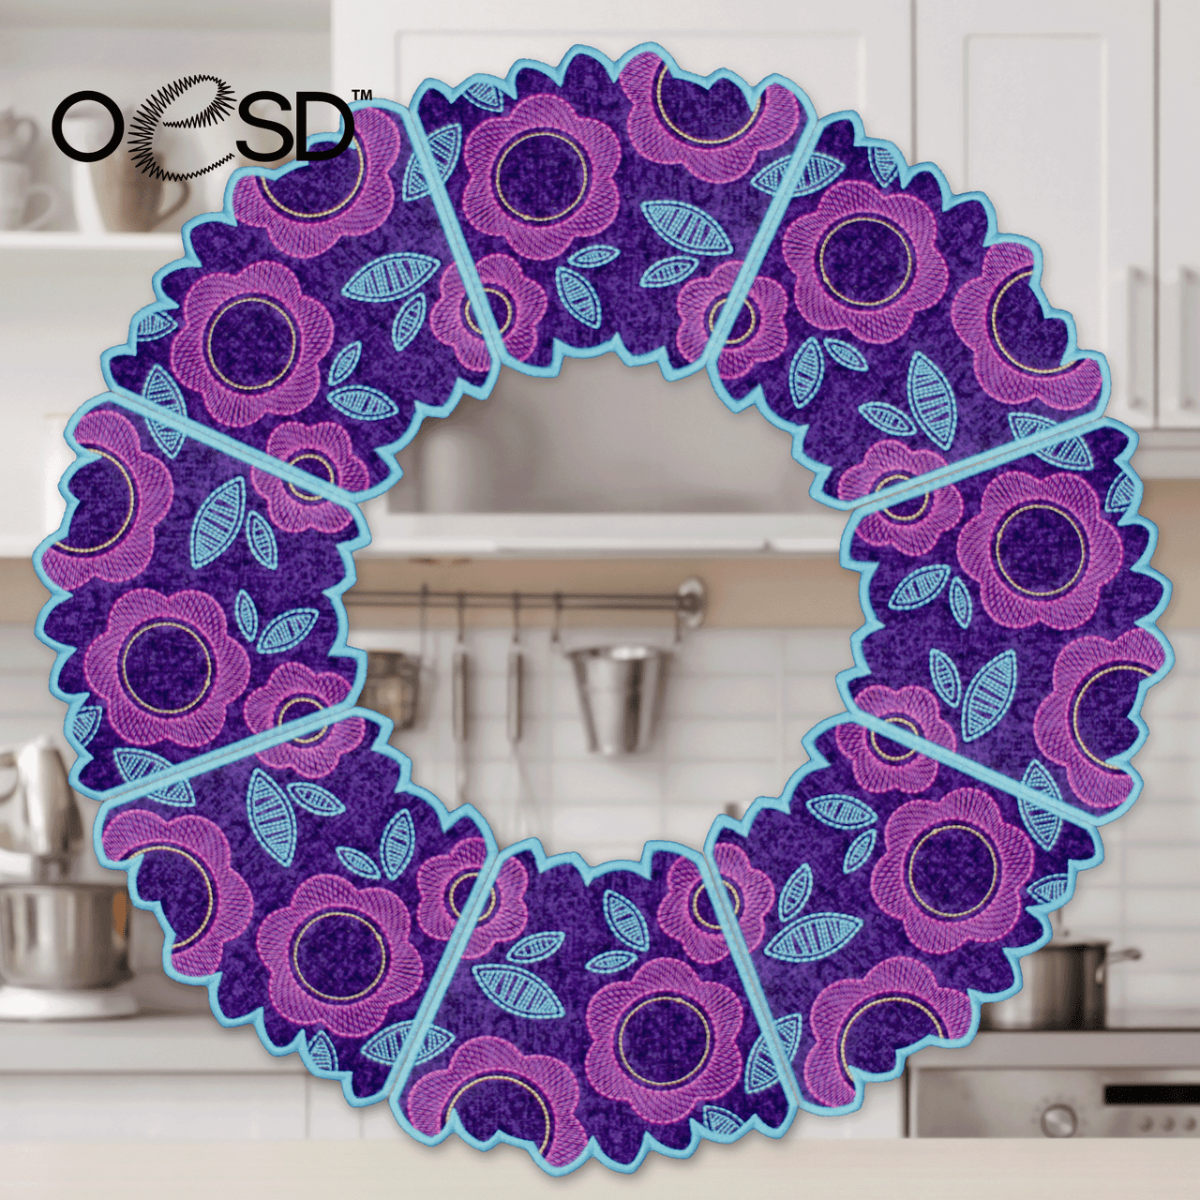 OESD Free Standing Lace Floral Wreaths,OESD Free Standing Lace Floral Wreaths,OESD Free Standing Lace Floral Wreaths,OESD Free Standing Lace Floral Wreaths